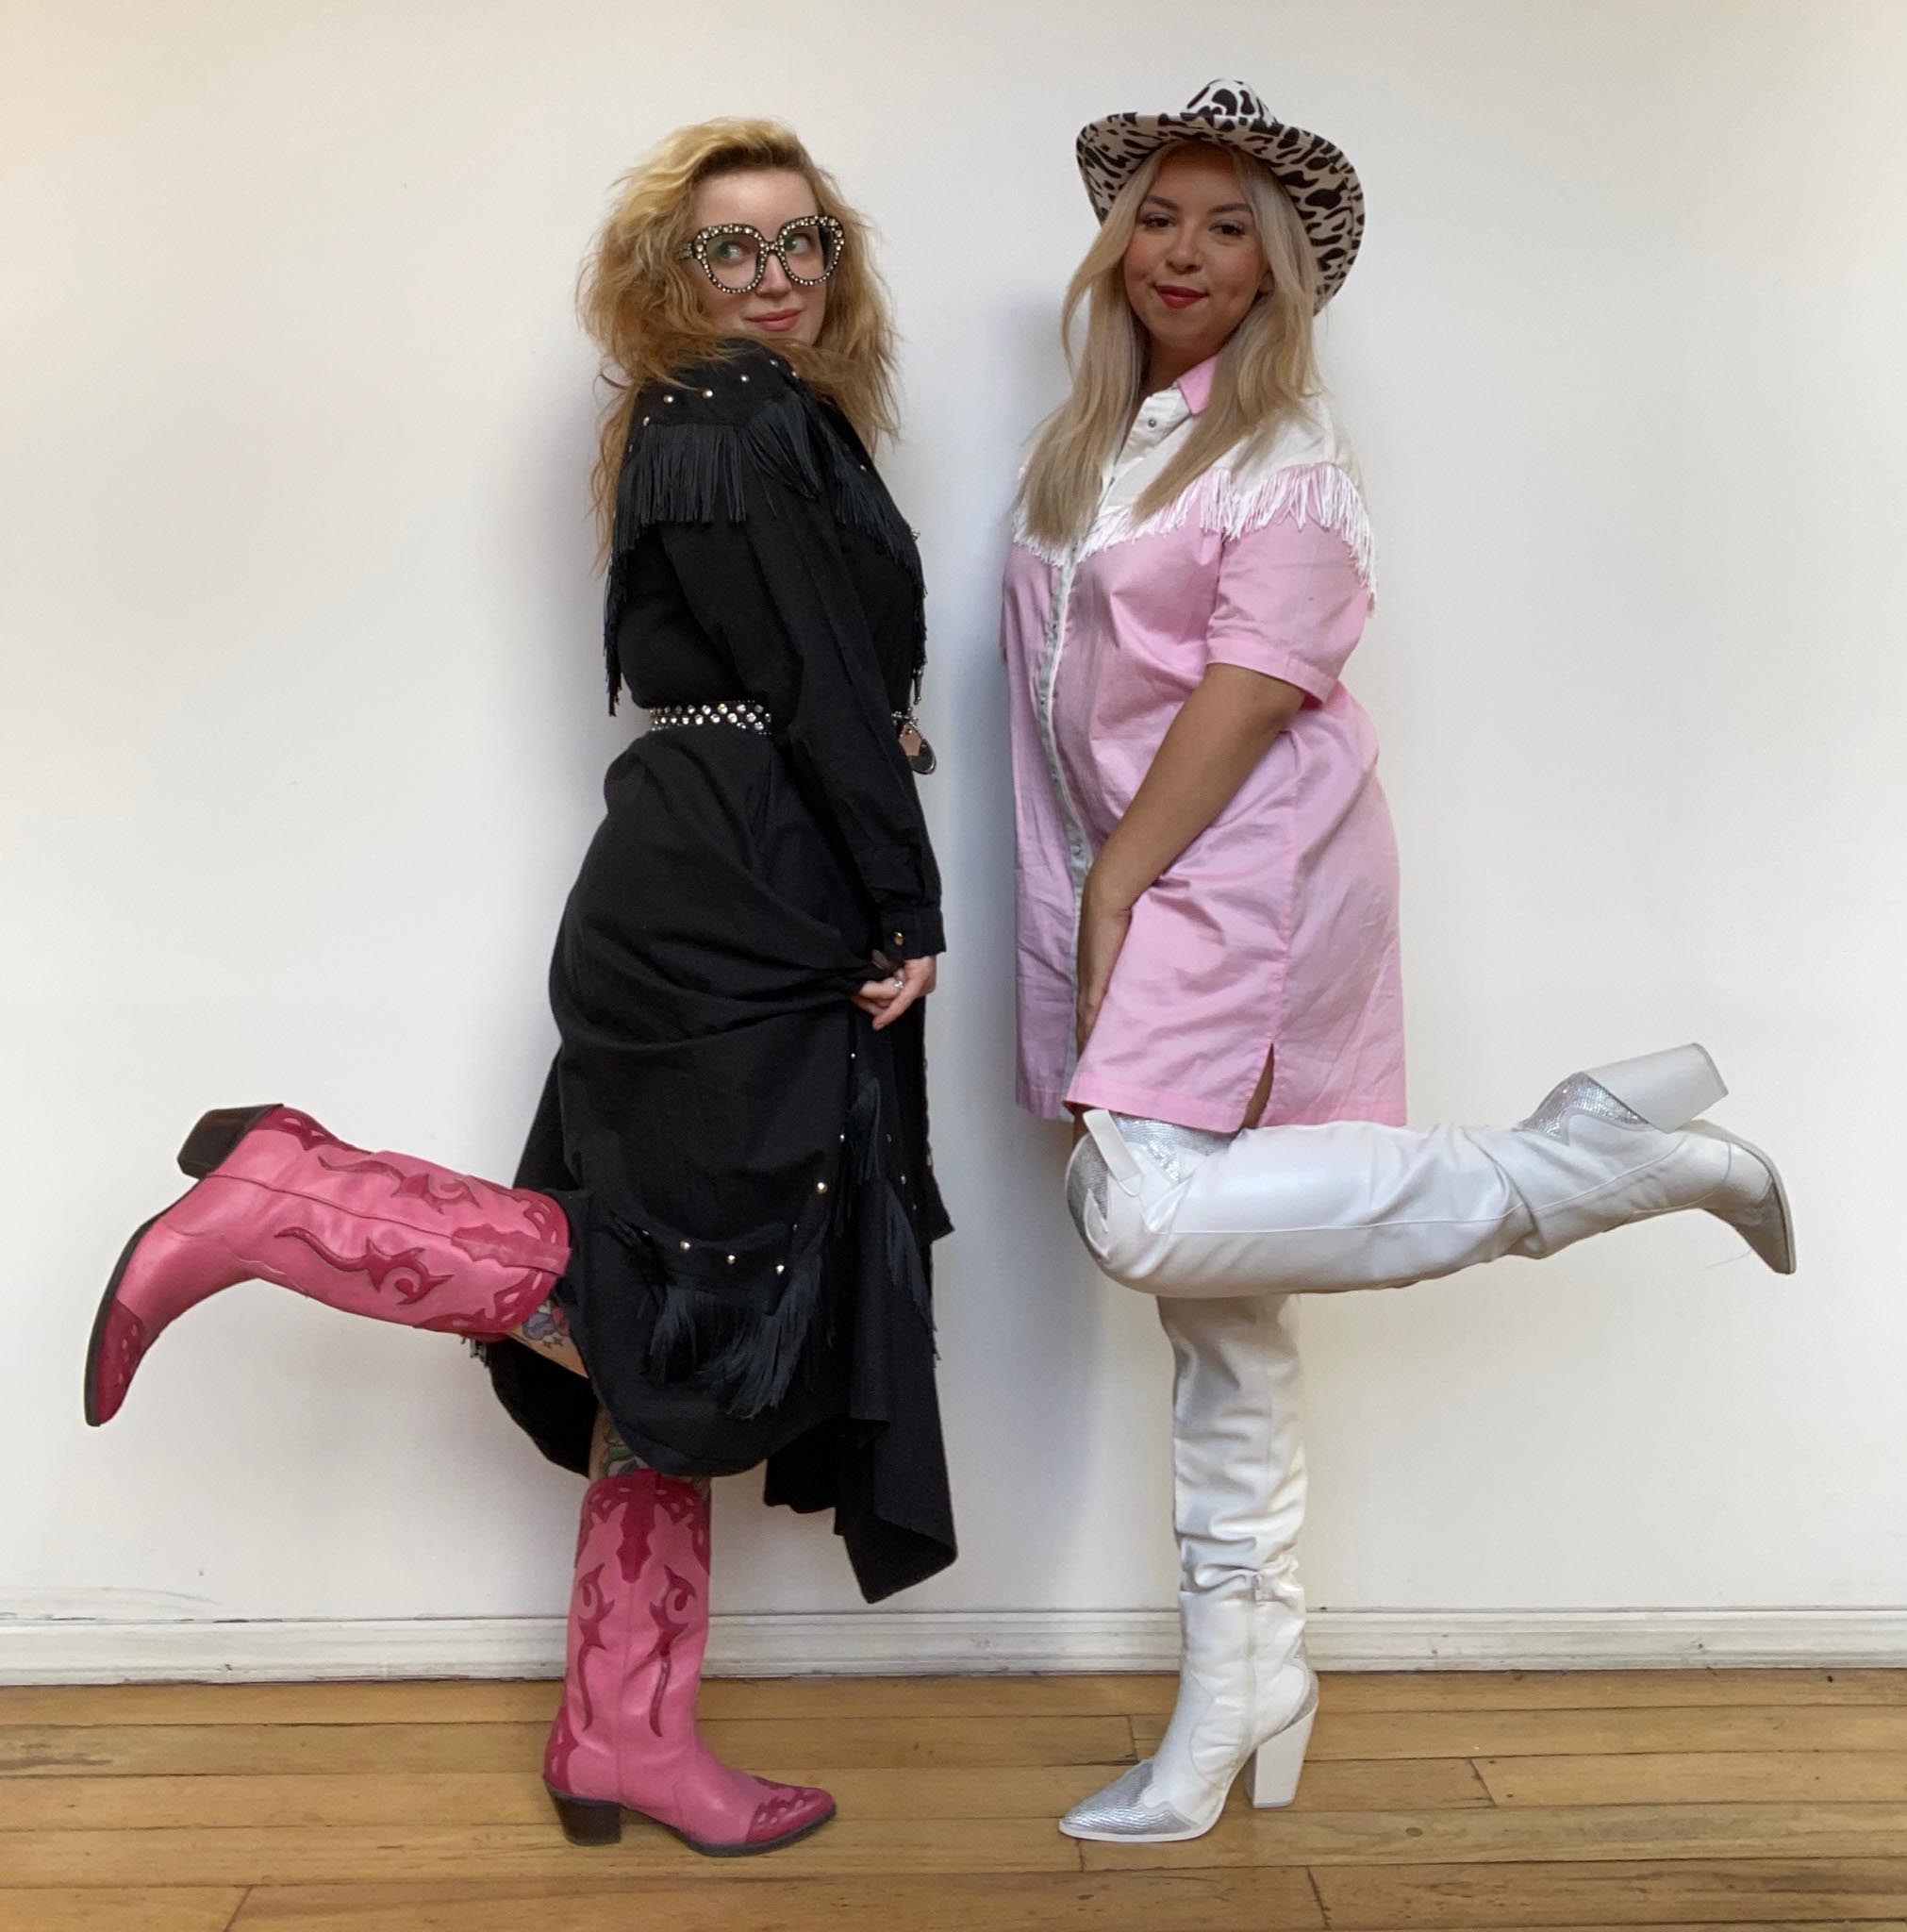 2 women standing against white wall indoors wearing cowboy boots and Western dresses with fring